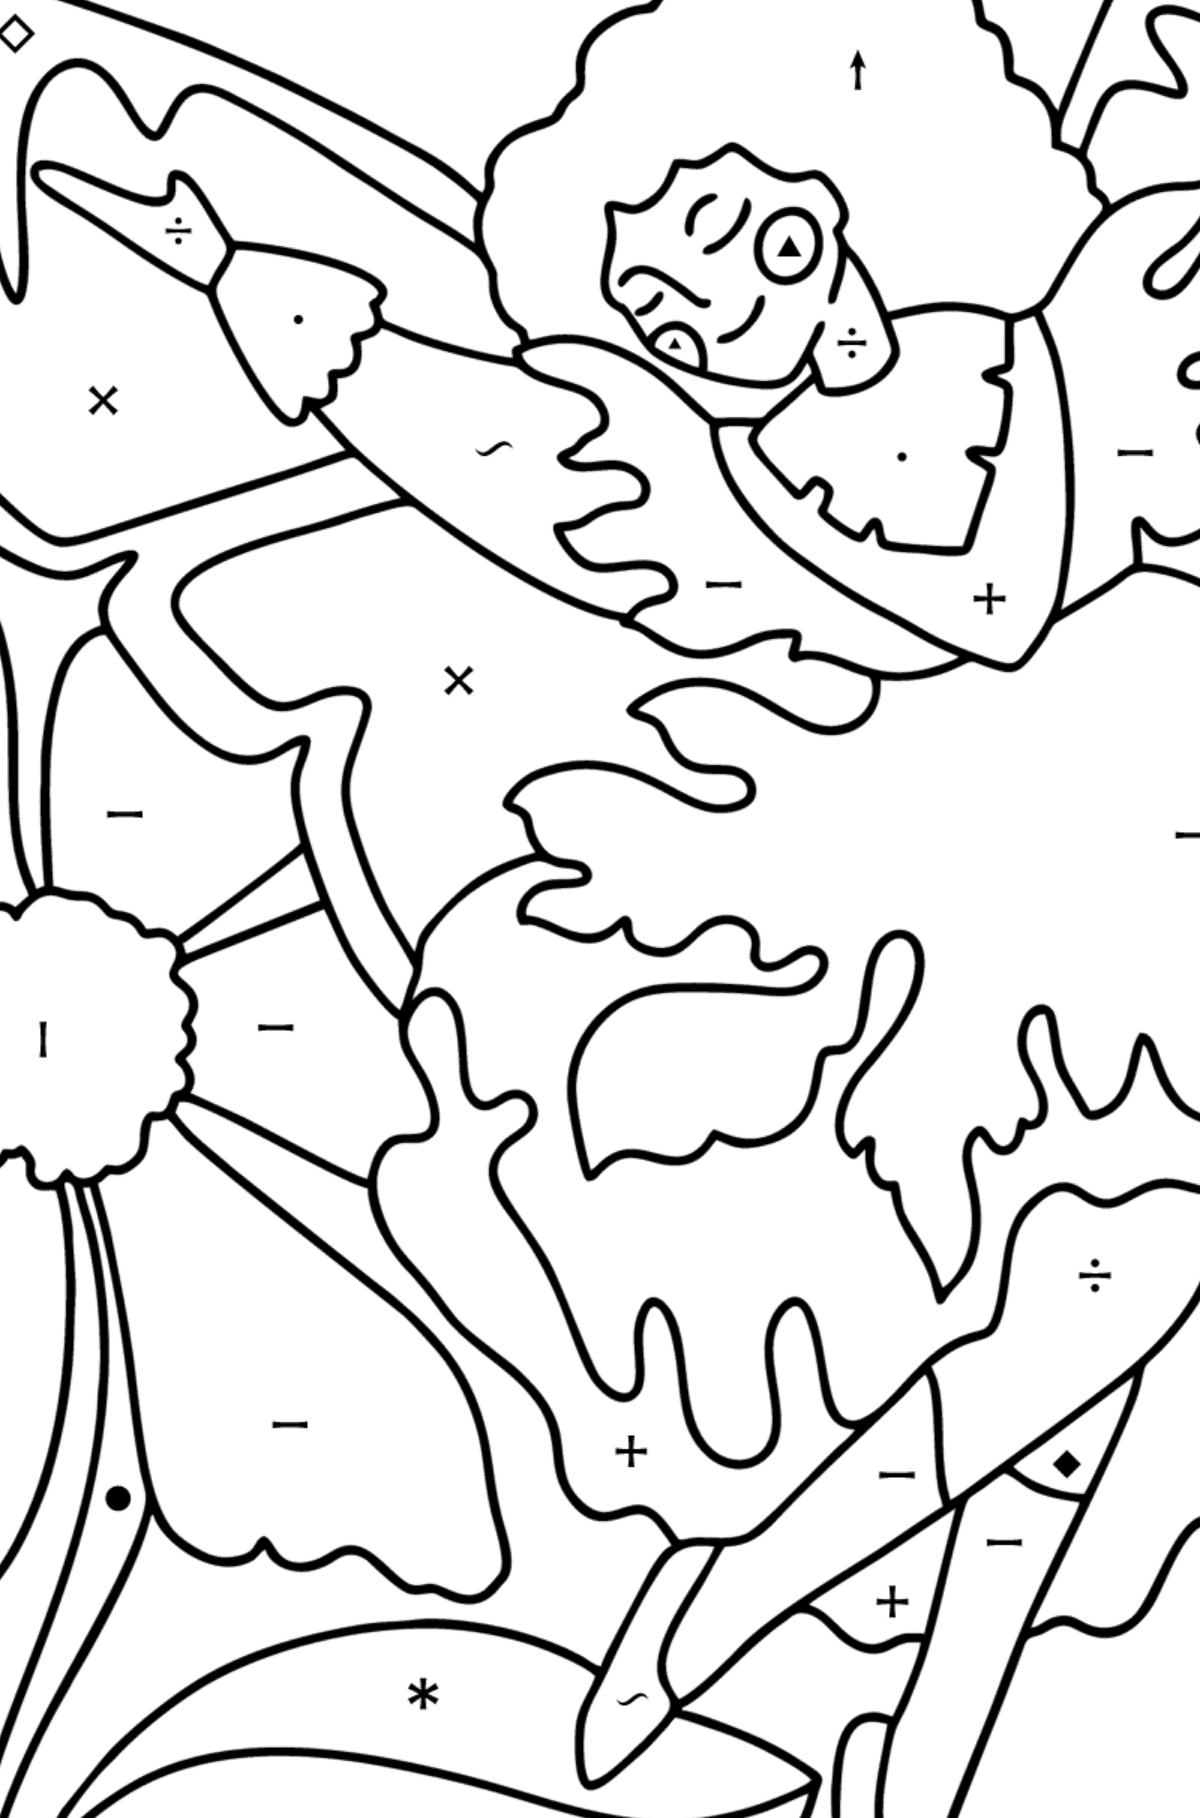 Fairy flies coloring page - Coloring by Symbols for Kids